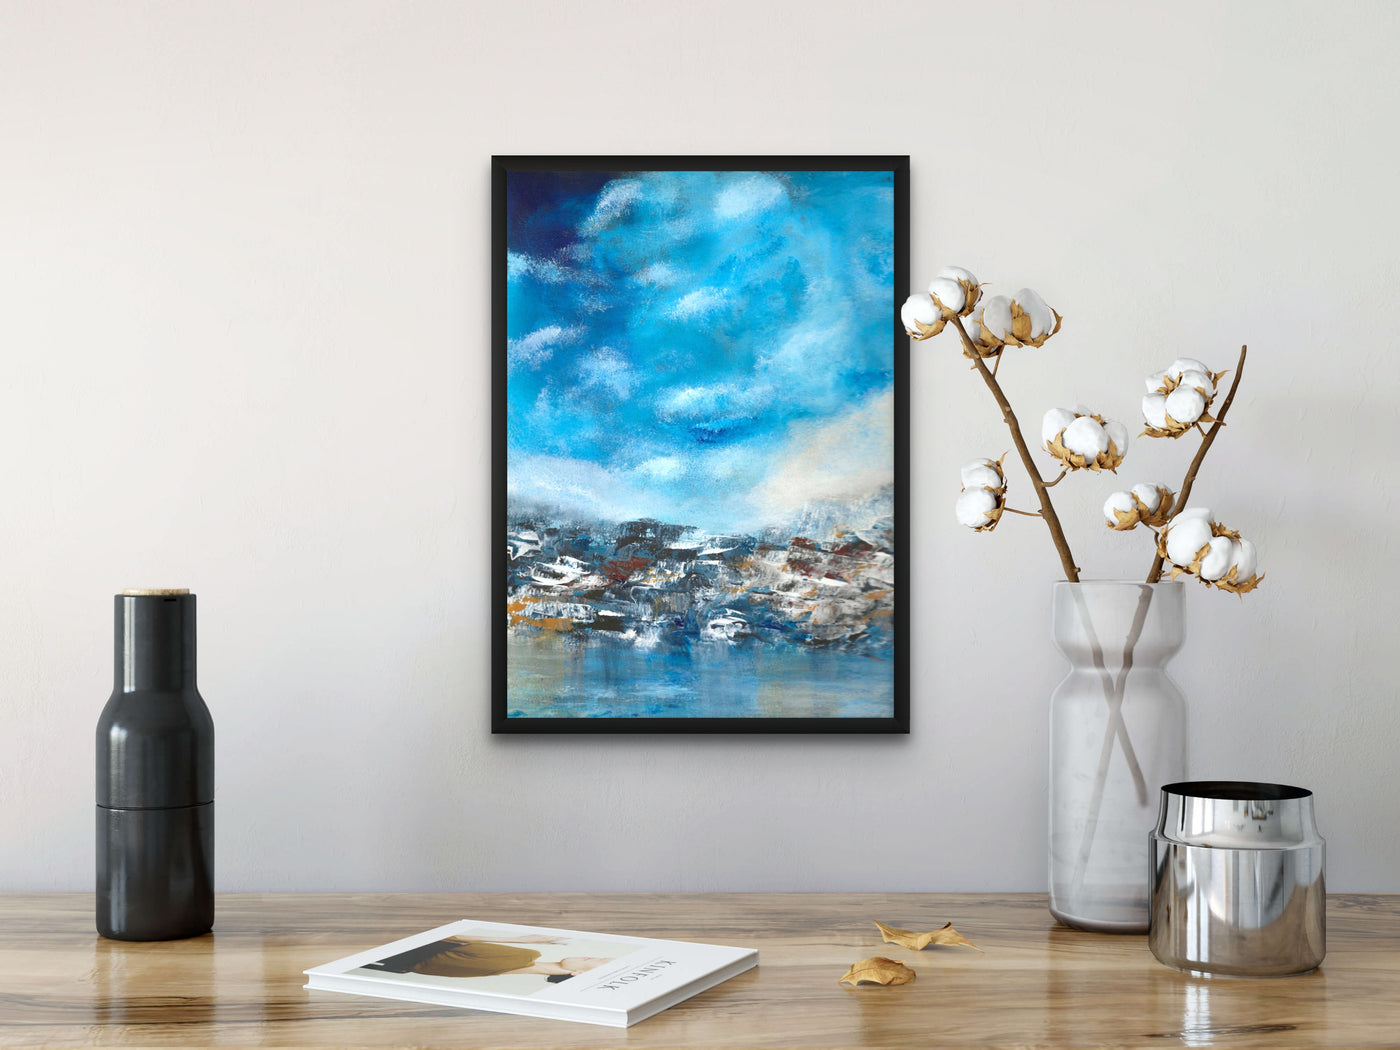 Azure Serenity, abstract painting of skies and mountains in blue